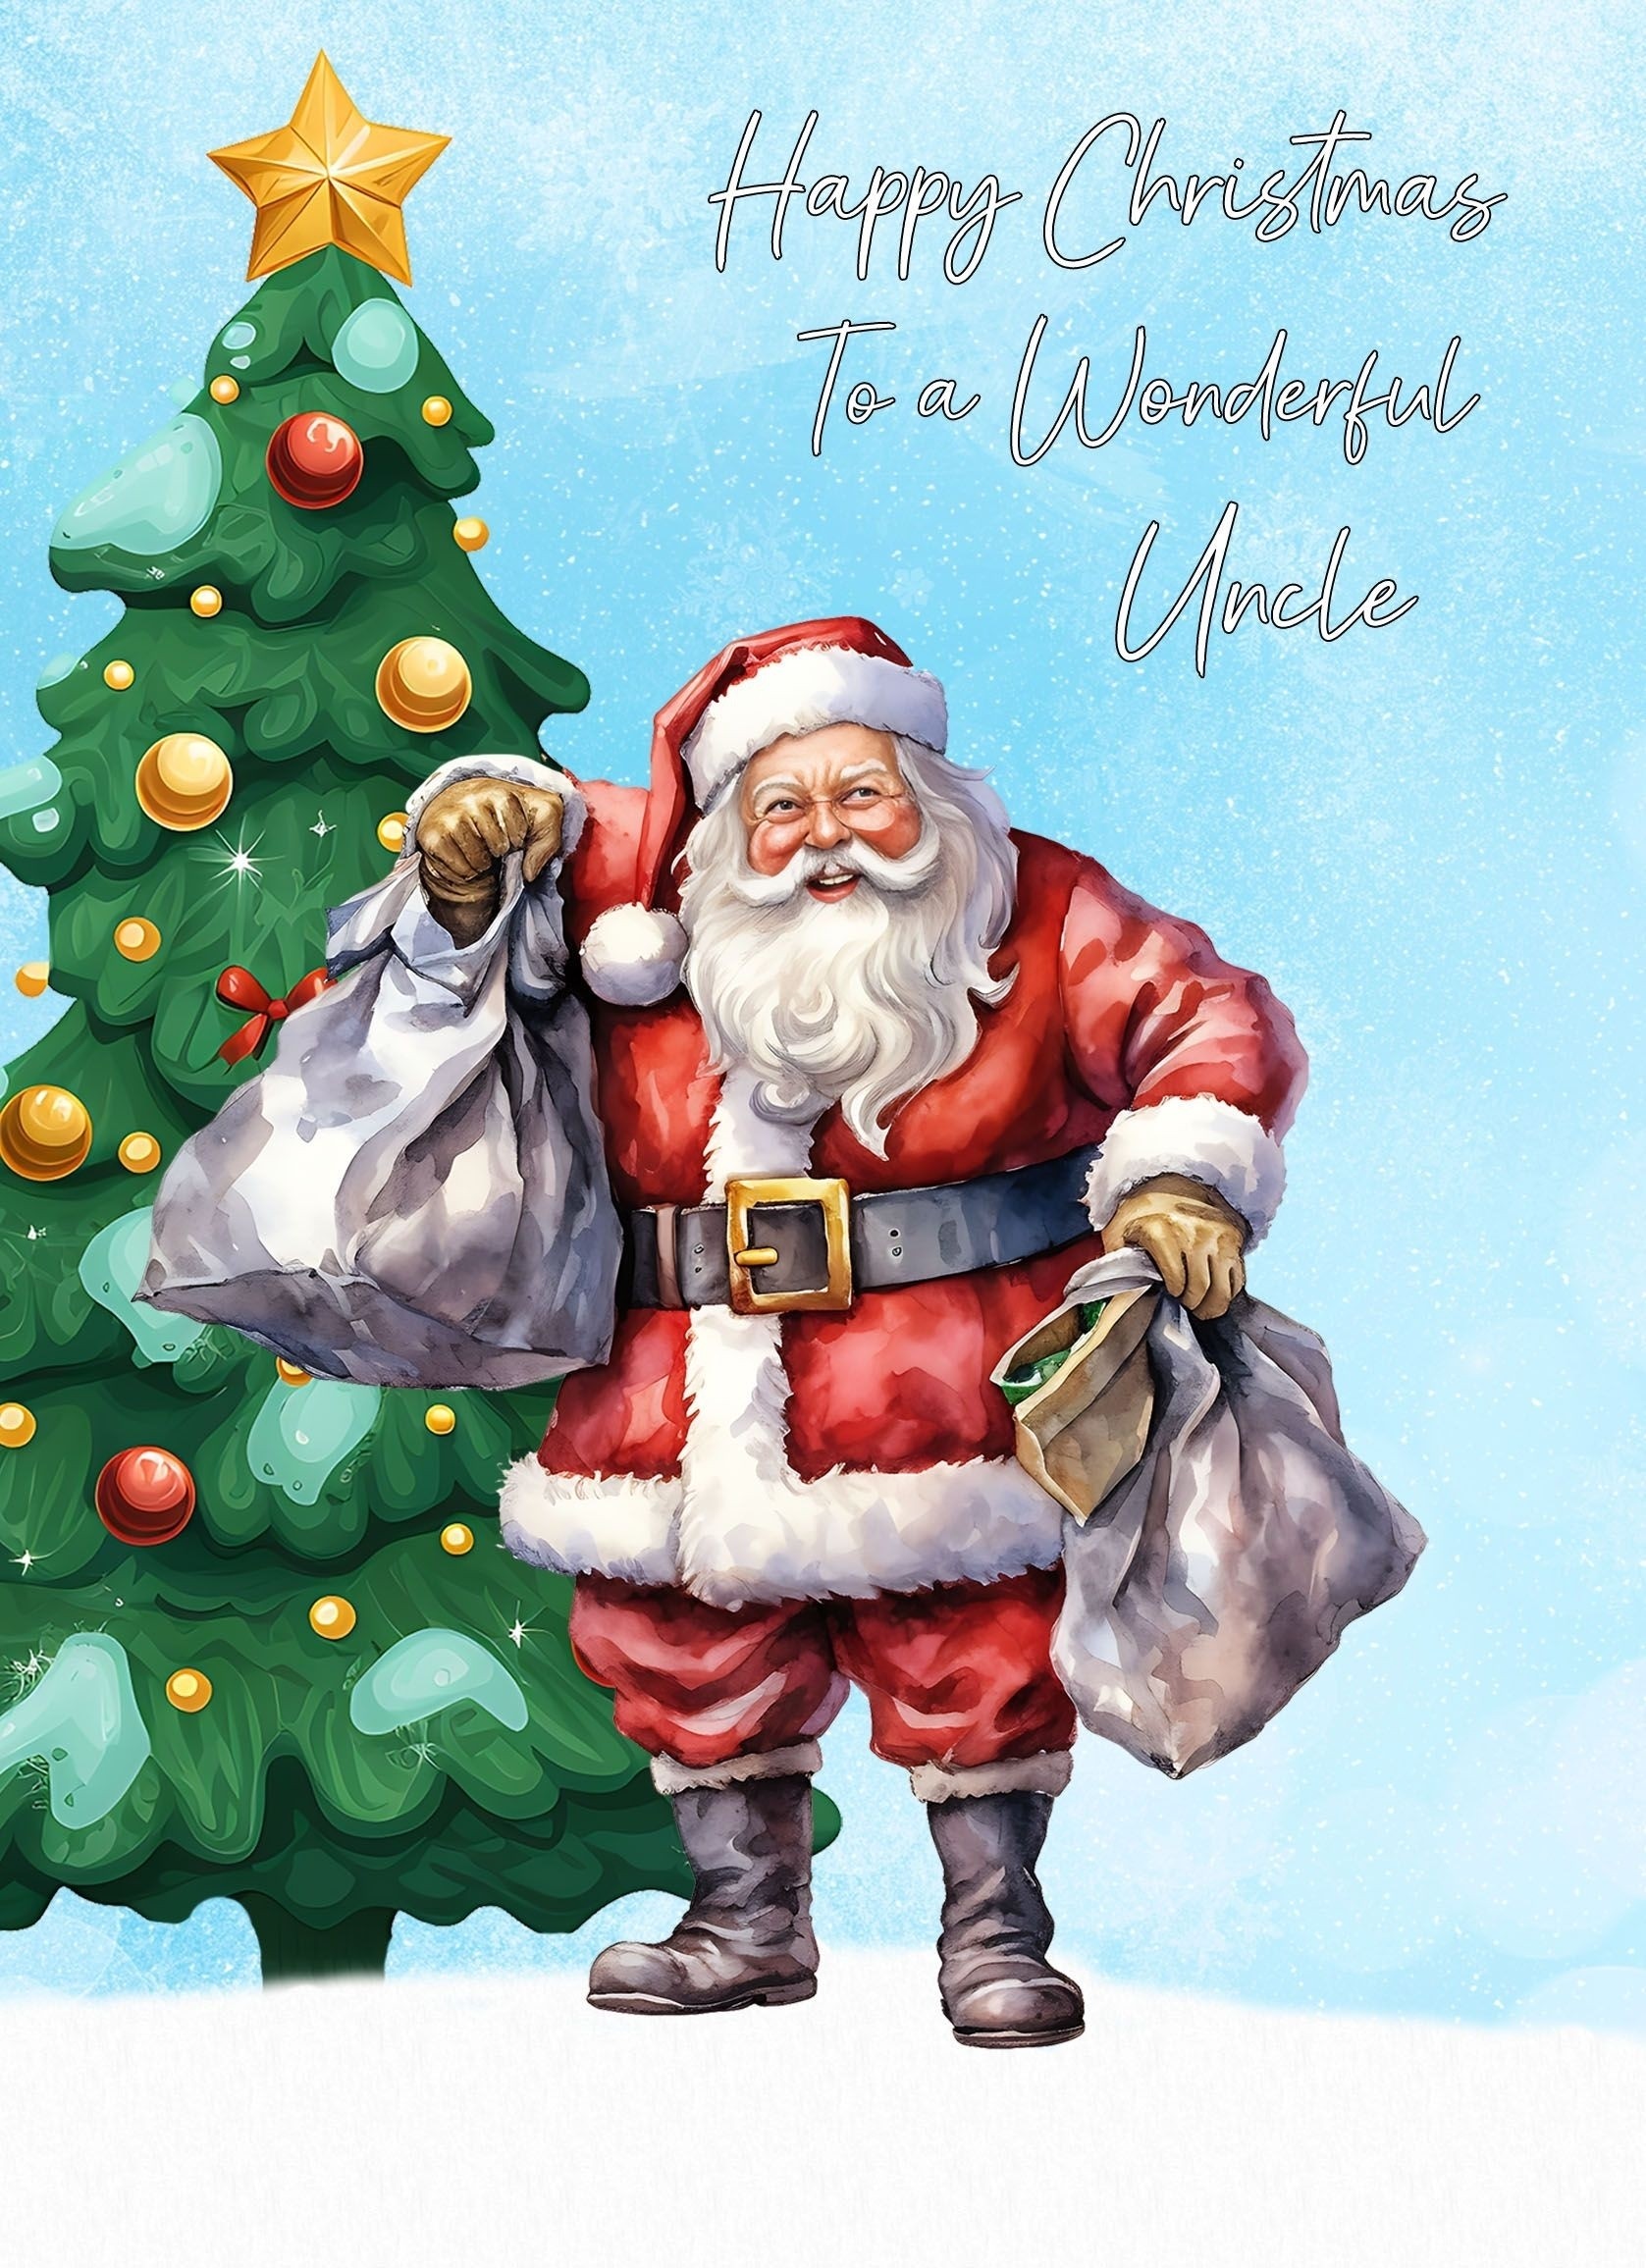 Christmas Card For Uncle (Blue, Santa Claus)